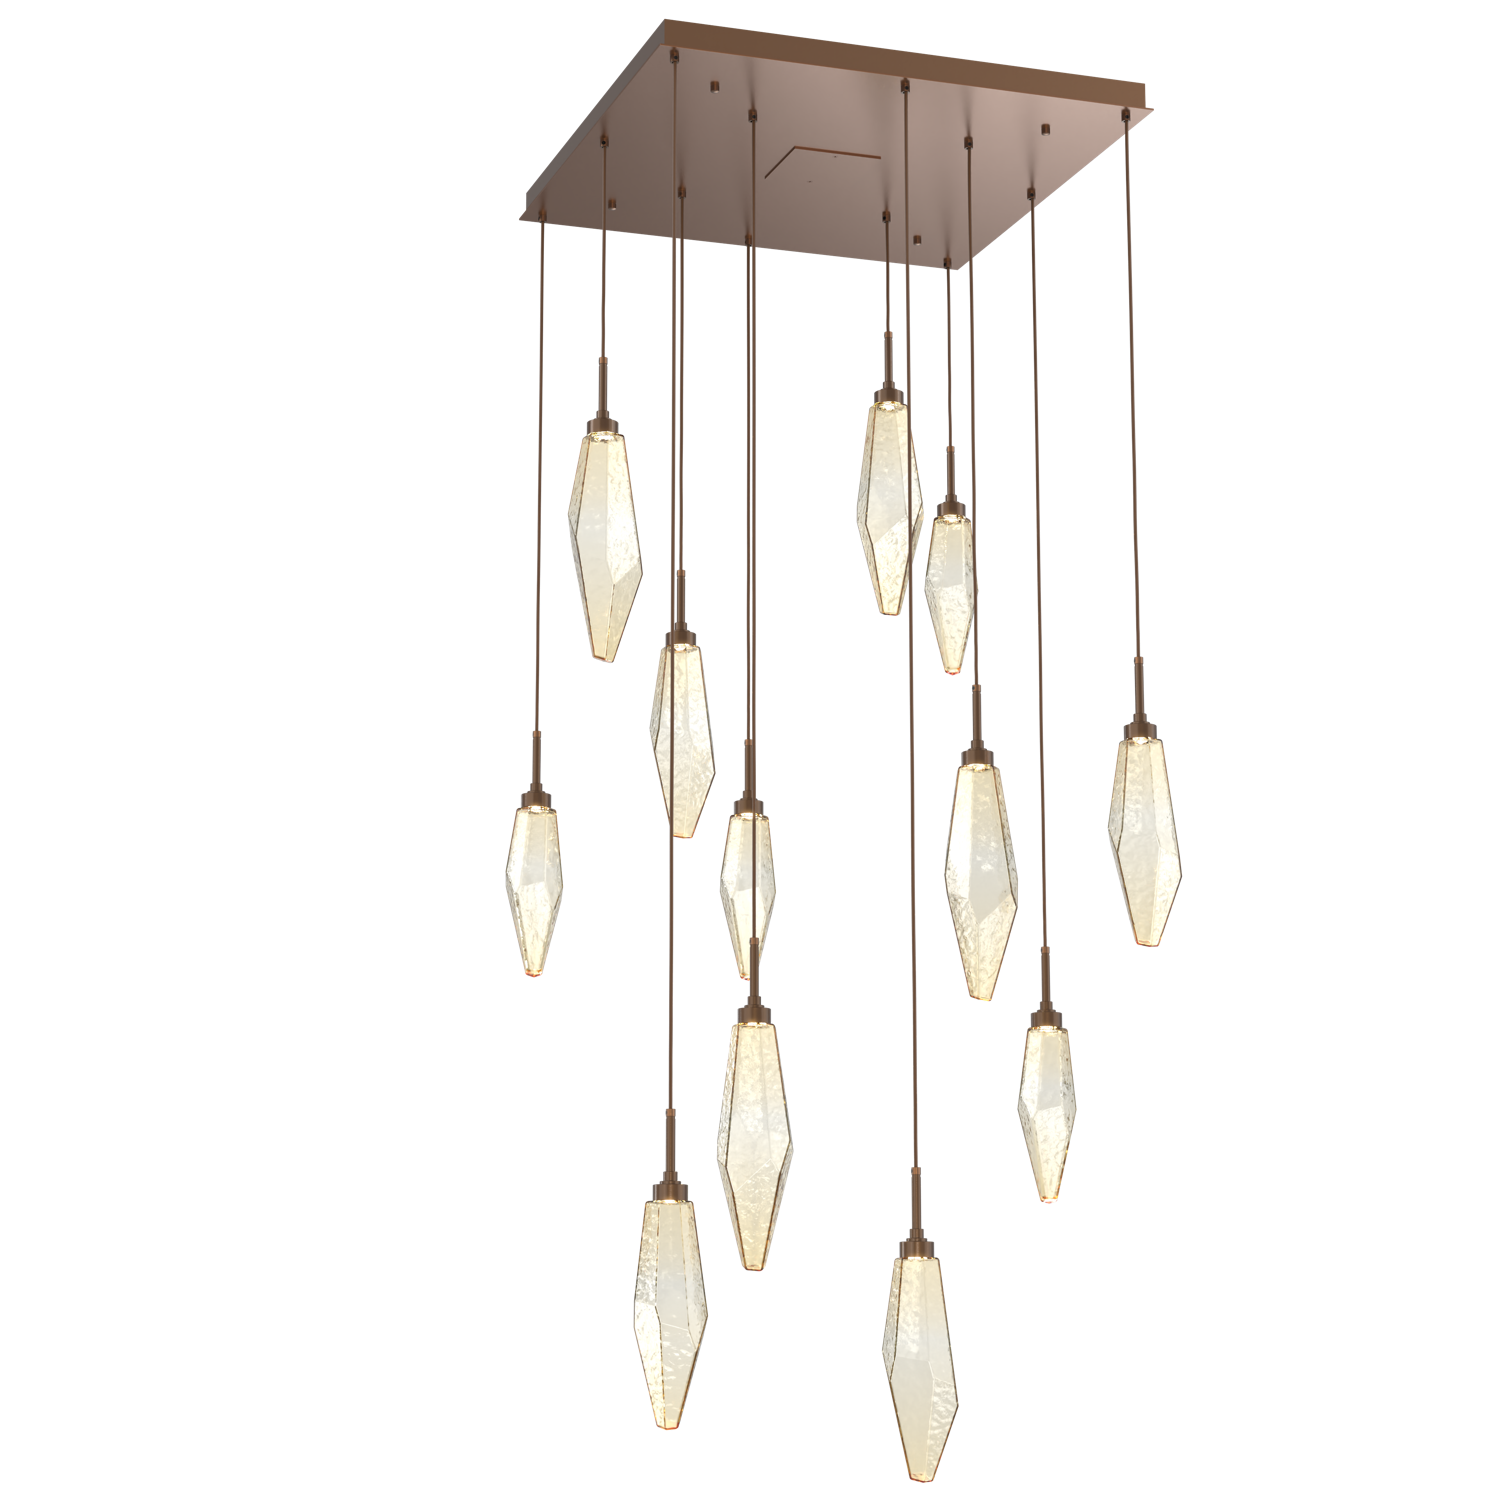 CHB0050-12-BB-CA-Hammerton-Studio-Rock-Crystal-12-light-square-pendant-chandelier-with-burnished-bronze-finish-and-chilled-amber-blown-glass-shades-and-LED-lamping